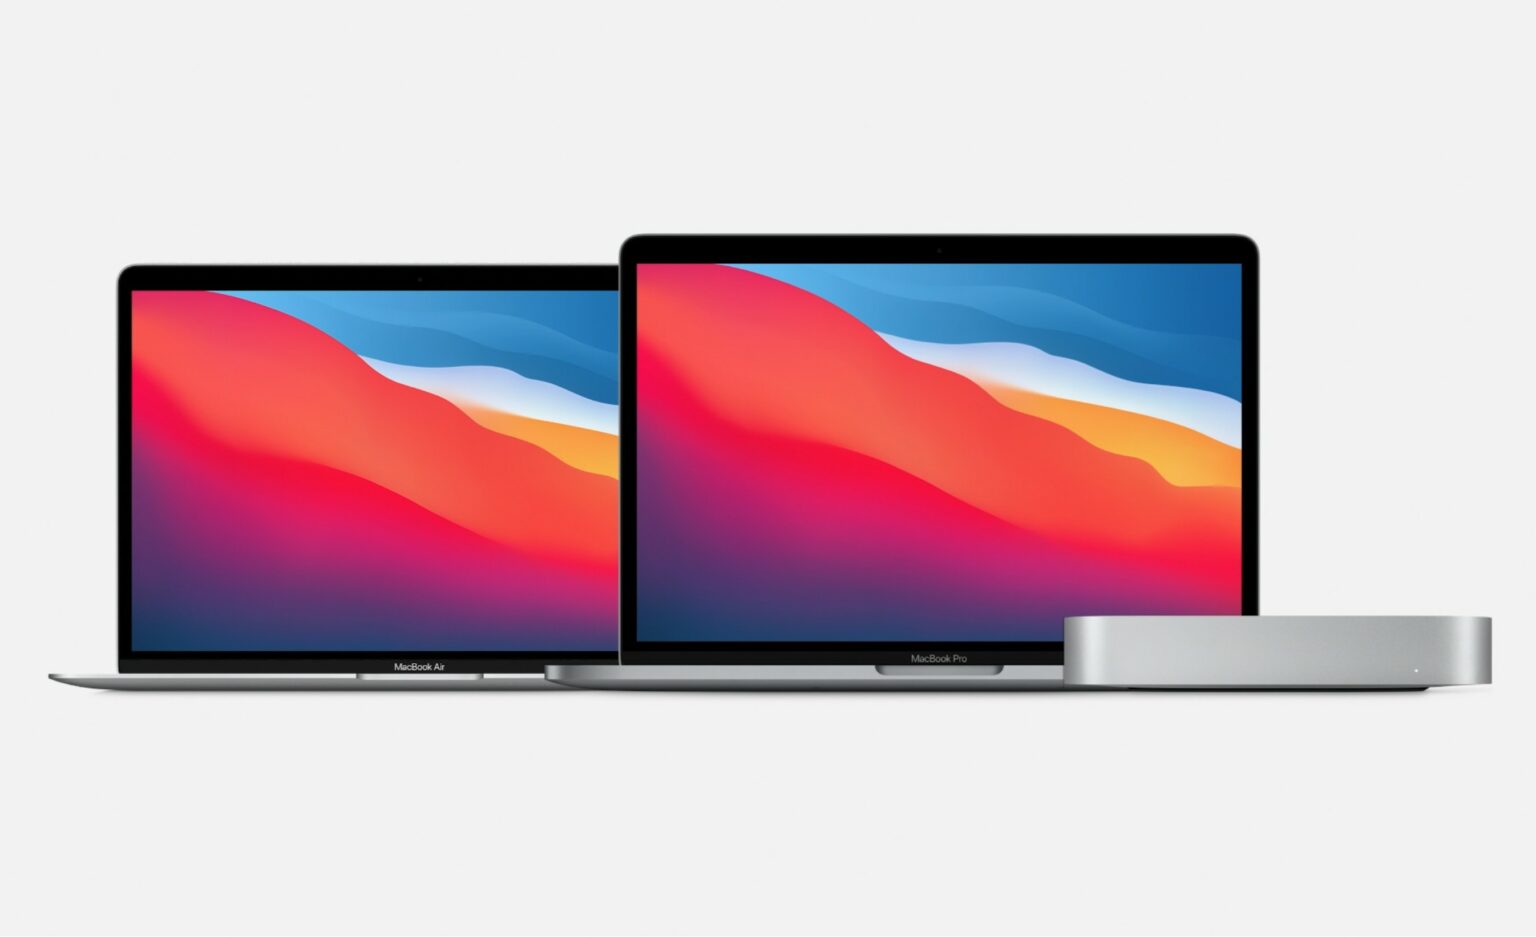 The Mac App Store will include iPhone and iPad apps for the new M1-powered Macs.